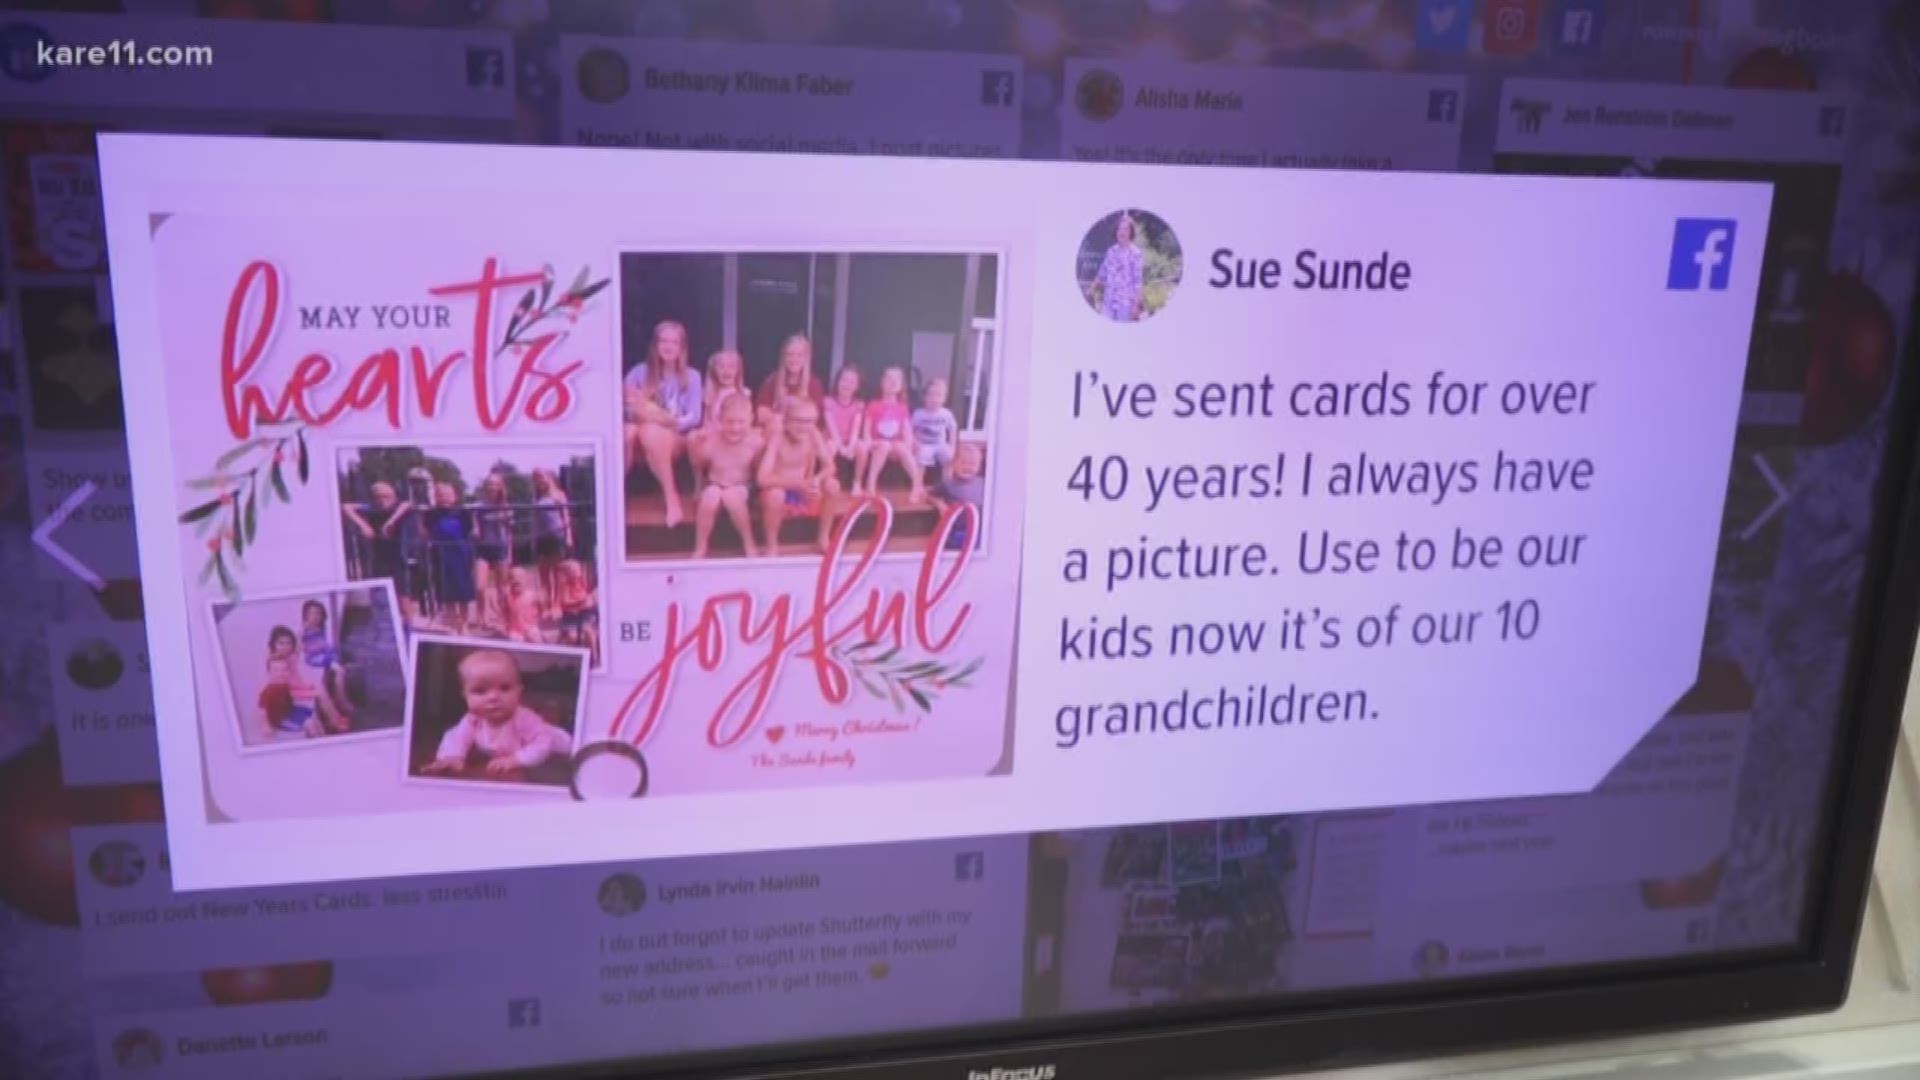 Do you still send holiday cards, or are they obsolete in the age of social media? We asked you on our KARE 11 Facebook page and got some awesome photos in response!